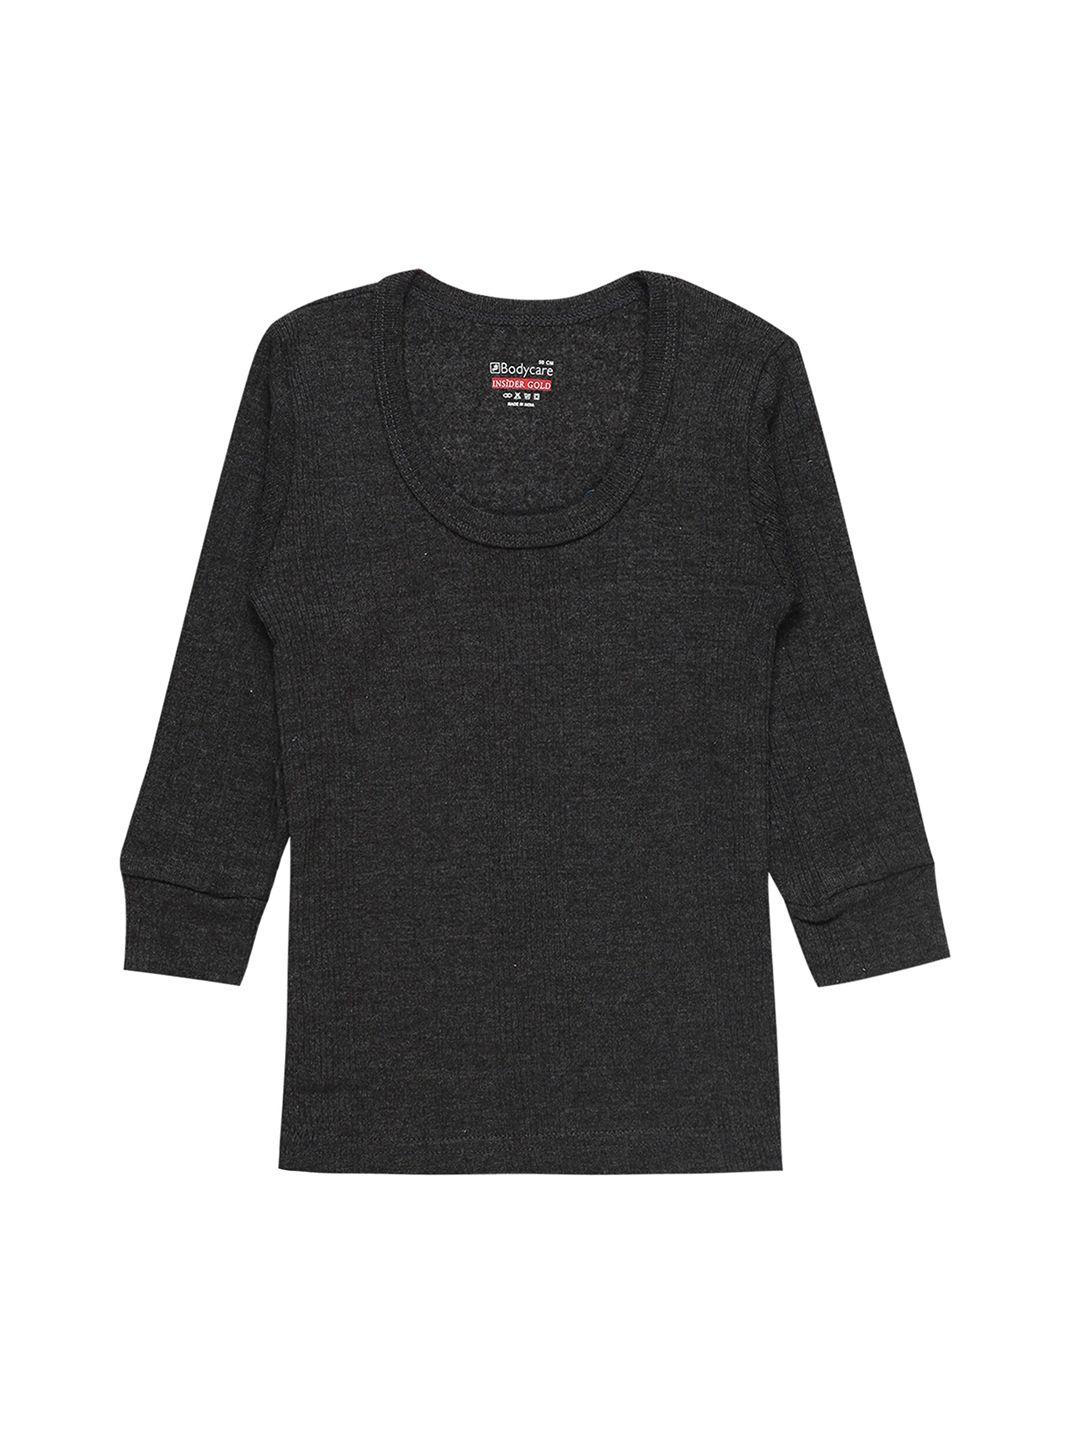 Bodycare Kids Boys Charcoal Melange Solid Cotton Thermal Top